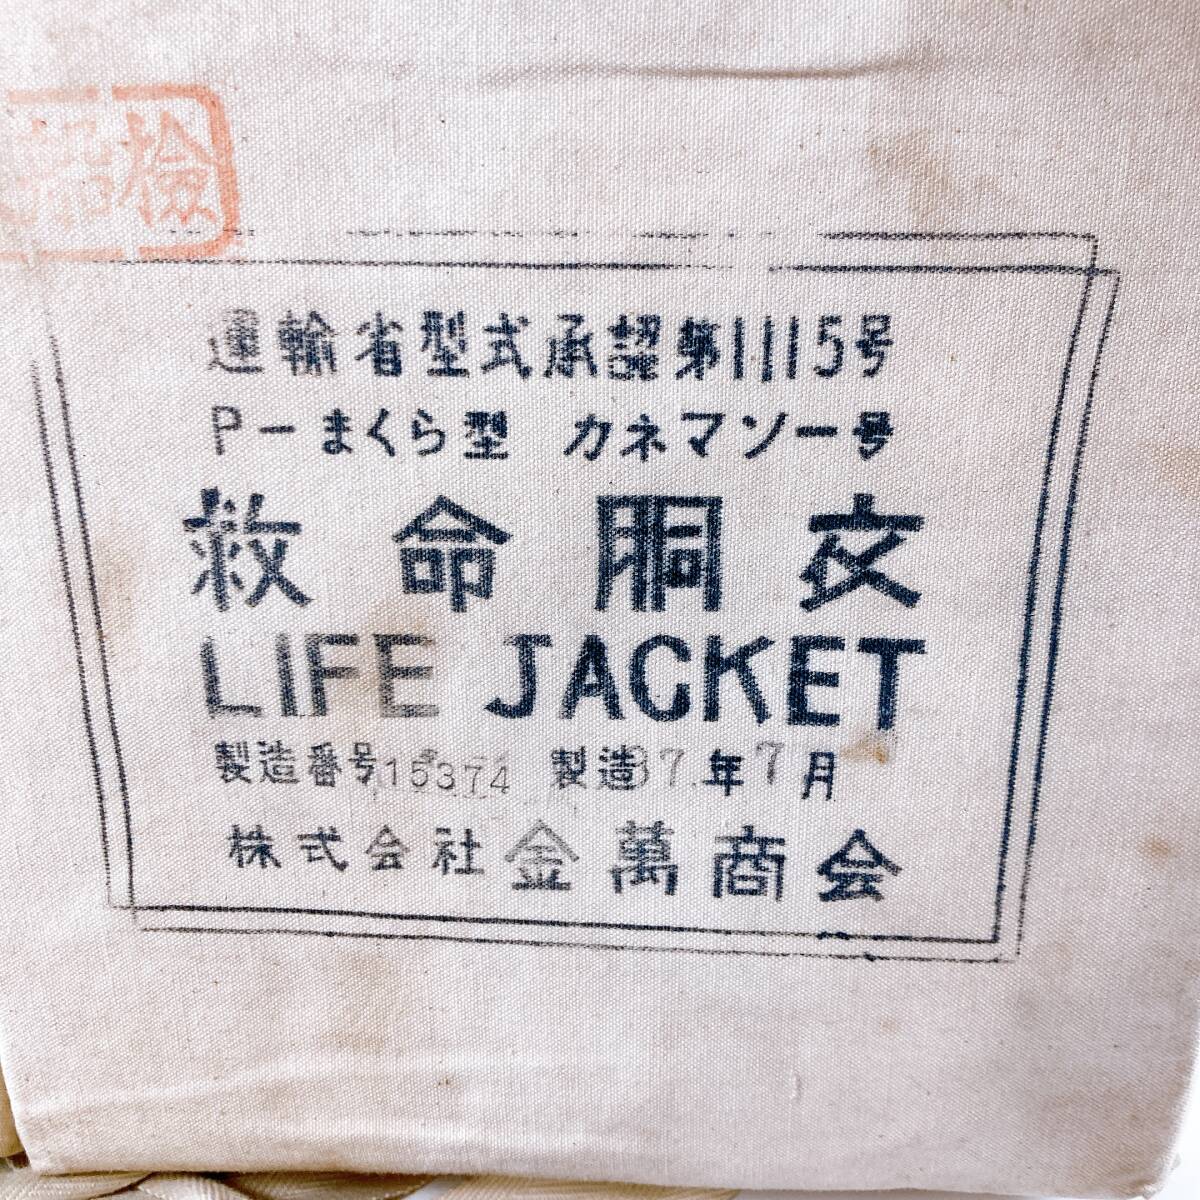  gold . association life jacket LIFE JACKET P-... type transportation . model approval no. 1115 number 1962 year 7 month manufacture 